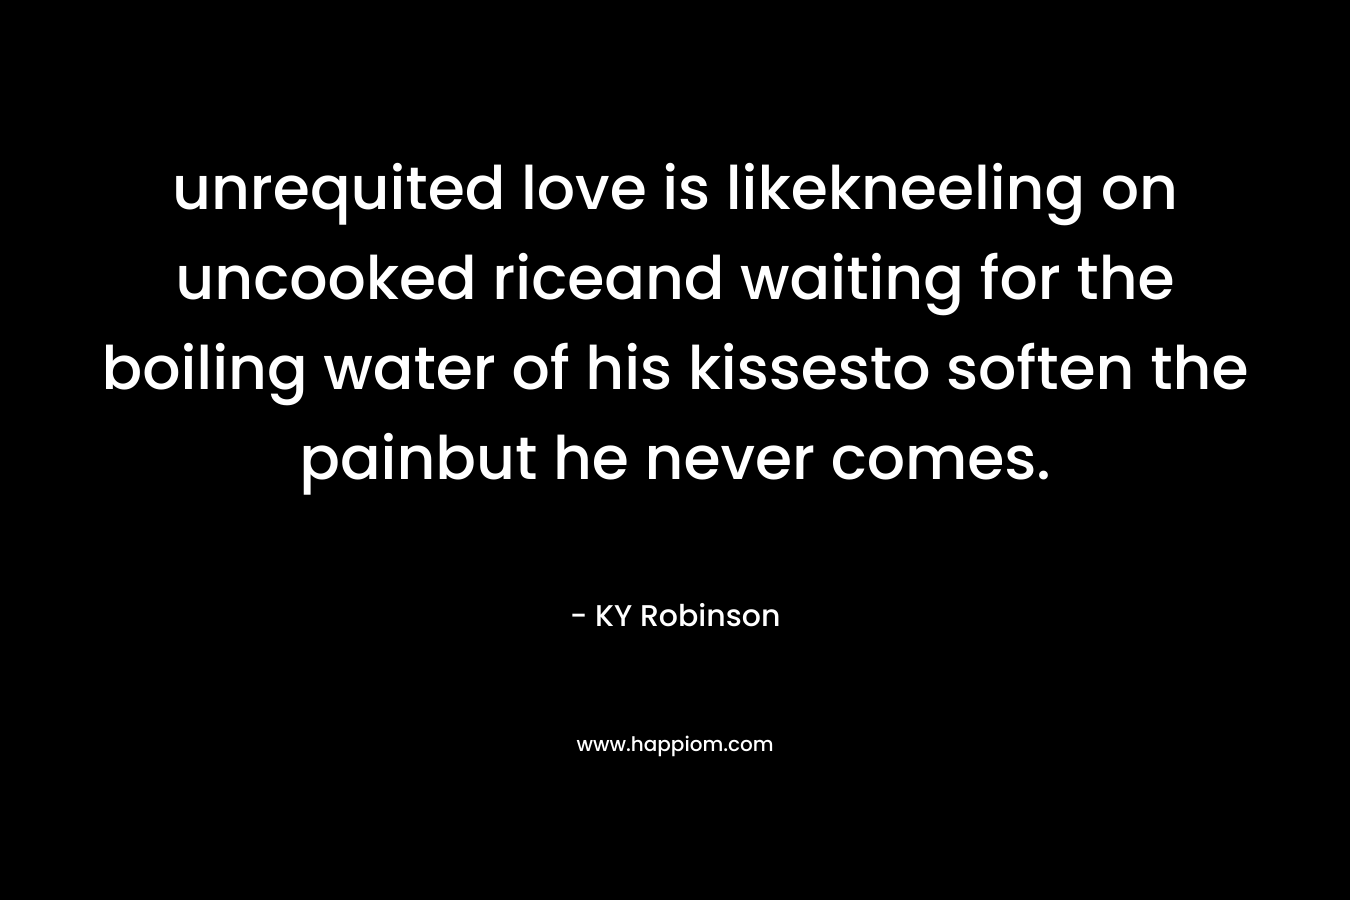 unrequited love is likekneeling on uncooked riceand waiting for the boiling water of his kissesto soften the painbut he never comes. – KY Robinson